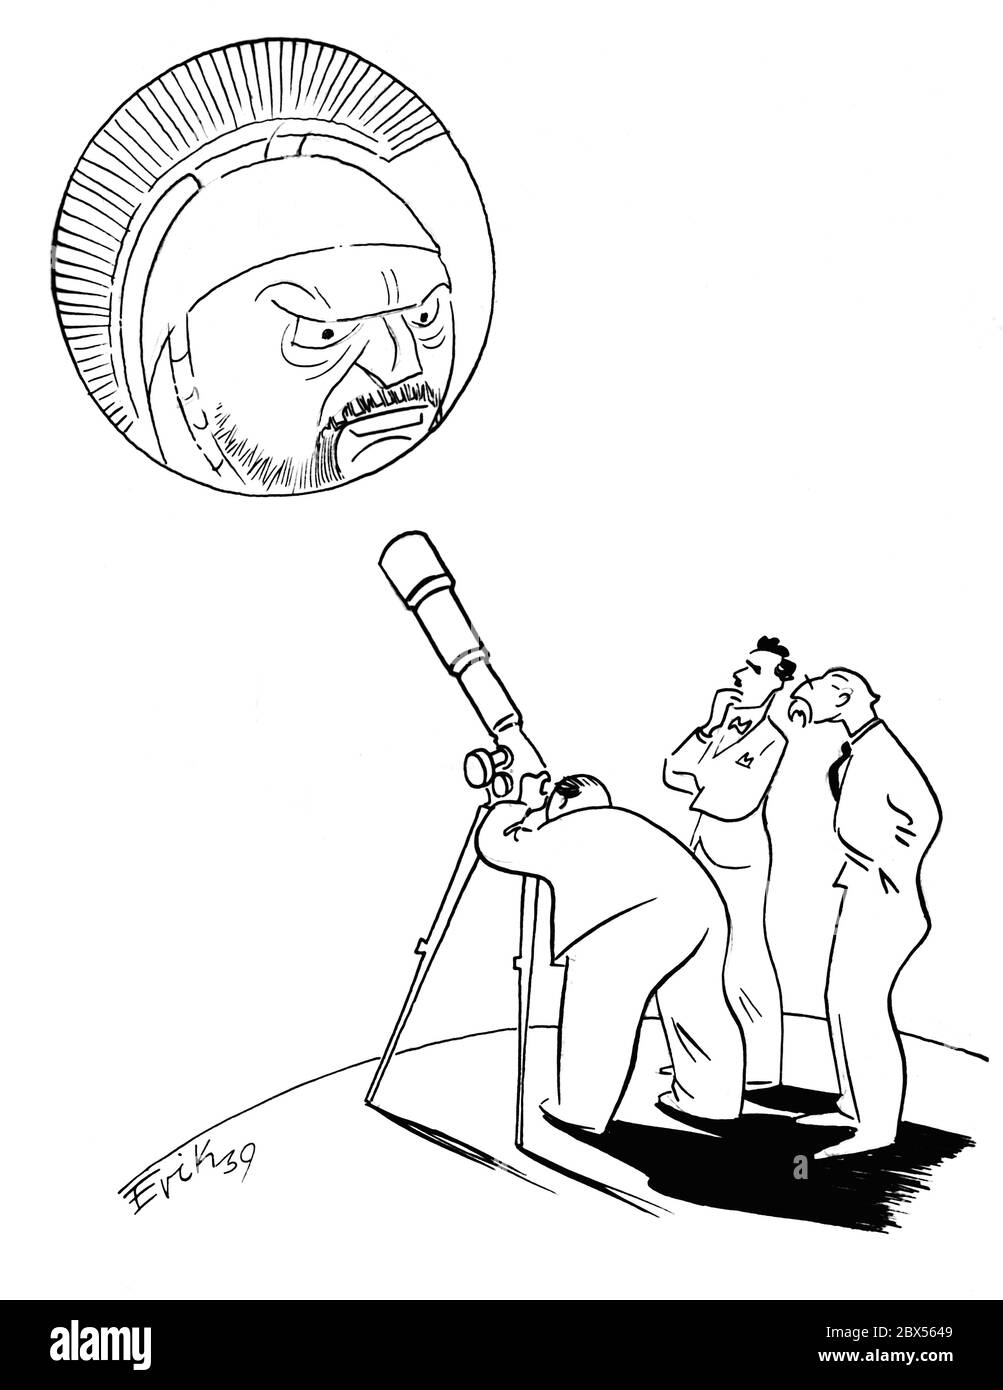 A caricature by Erik shows three people, including Winston Churchill and Anthony Eden, looking at the planet Mars through a telescope: 'It's a pity we can't bring it even closer!' Stock Photo